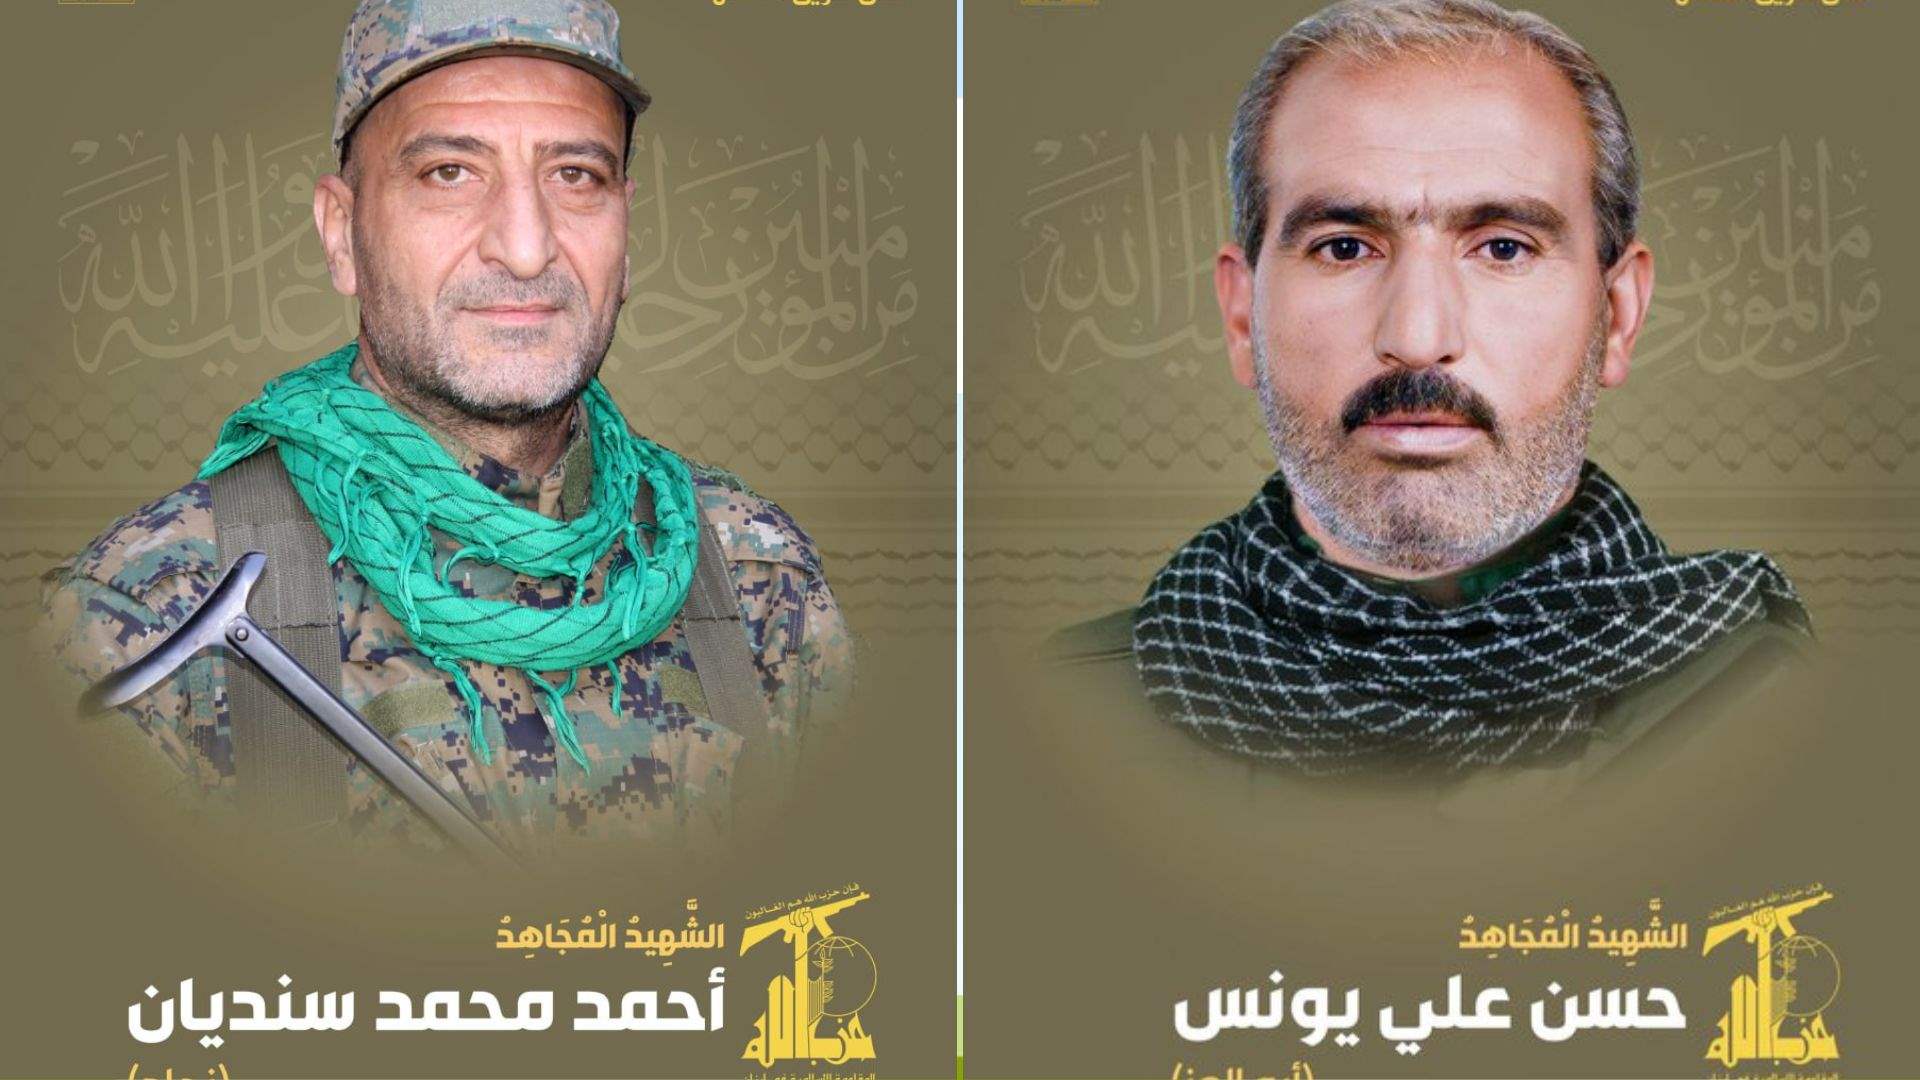 Hezbollah mourns two martyrs from Bekaa region